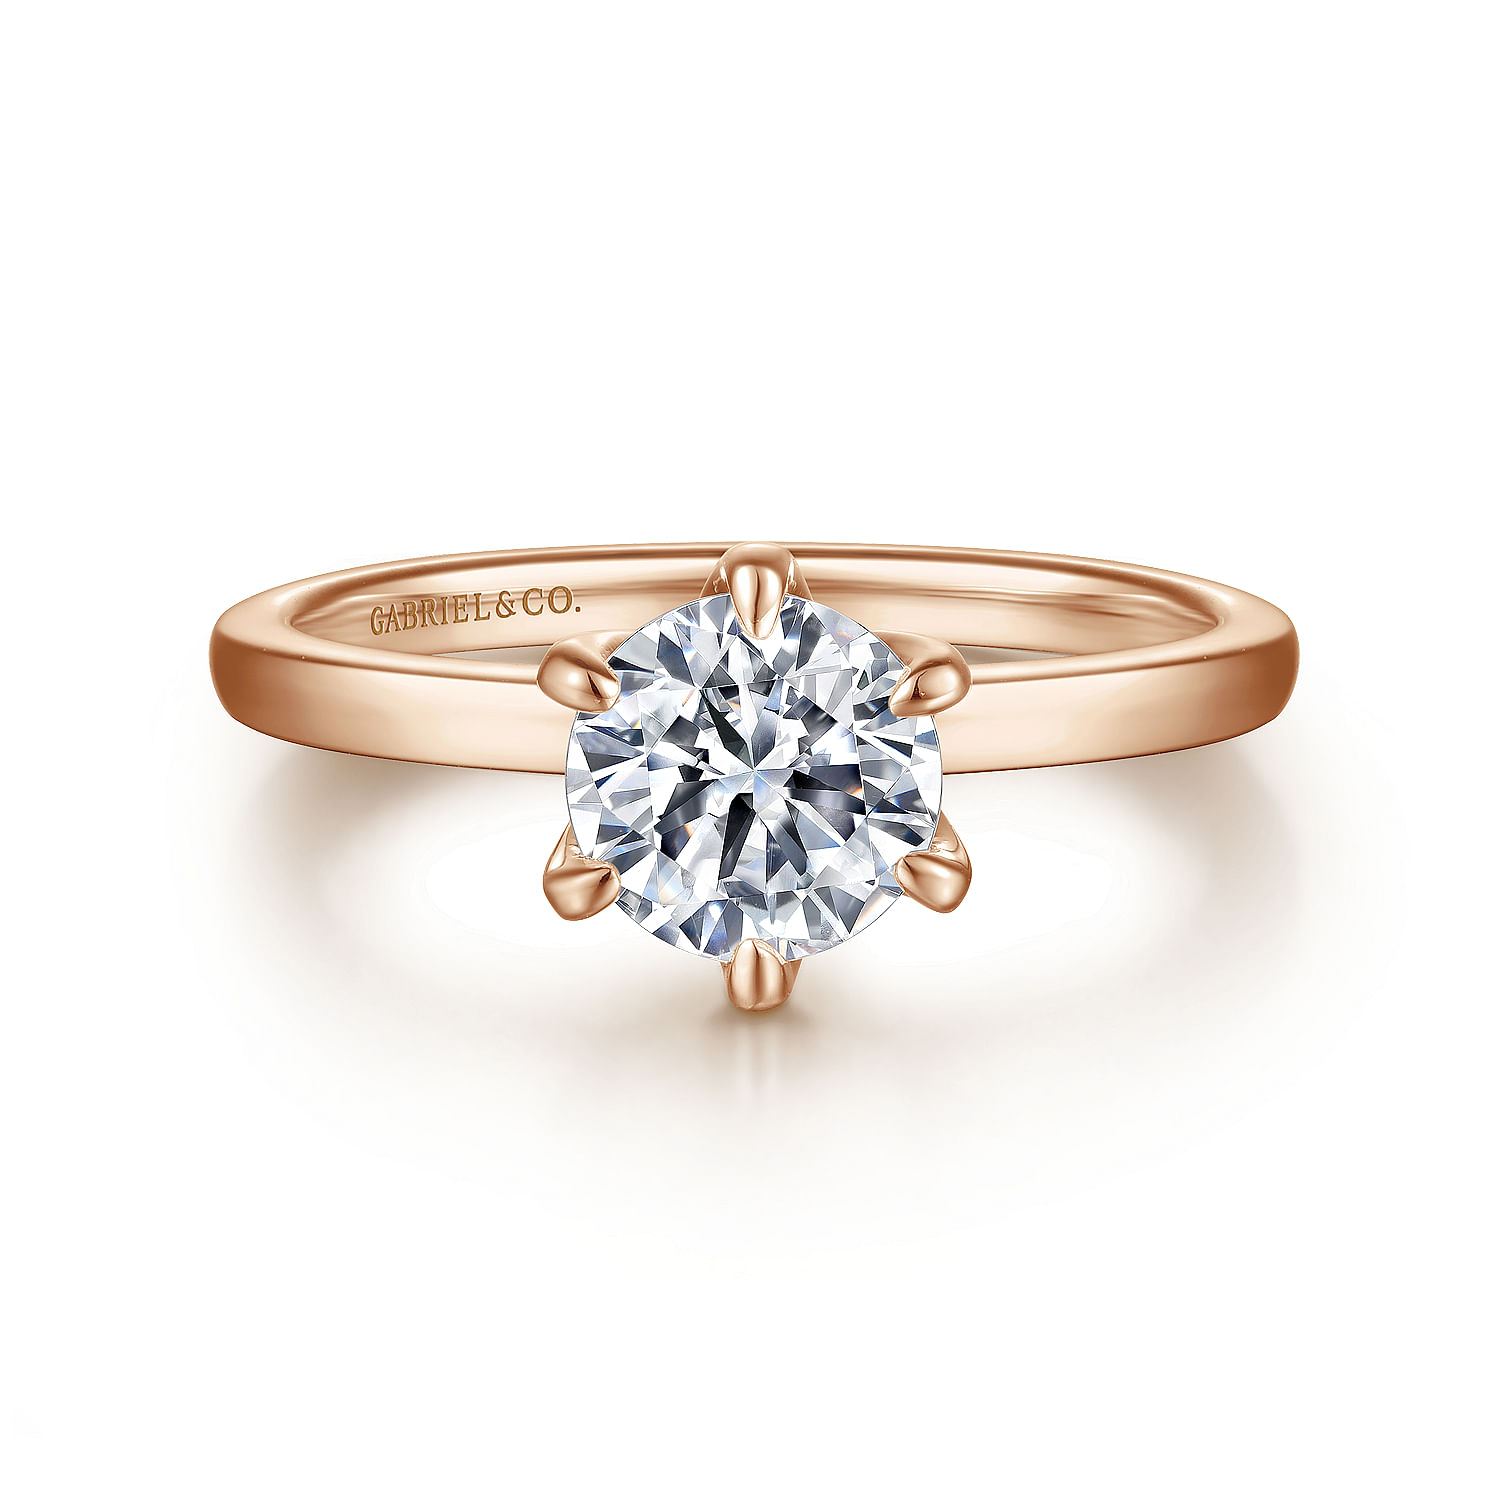 Gabriel - 14K Rose Gold 6 Prong Round Solitaire Engagement Ring